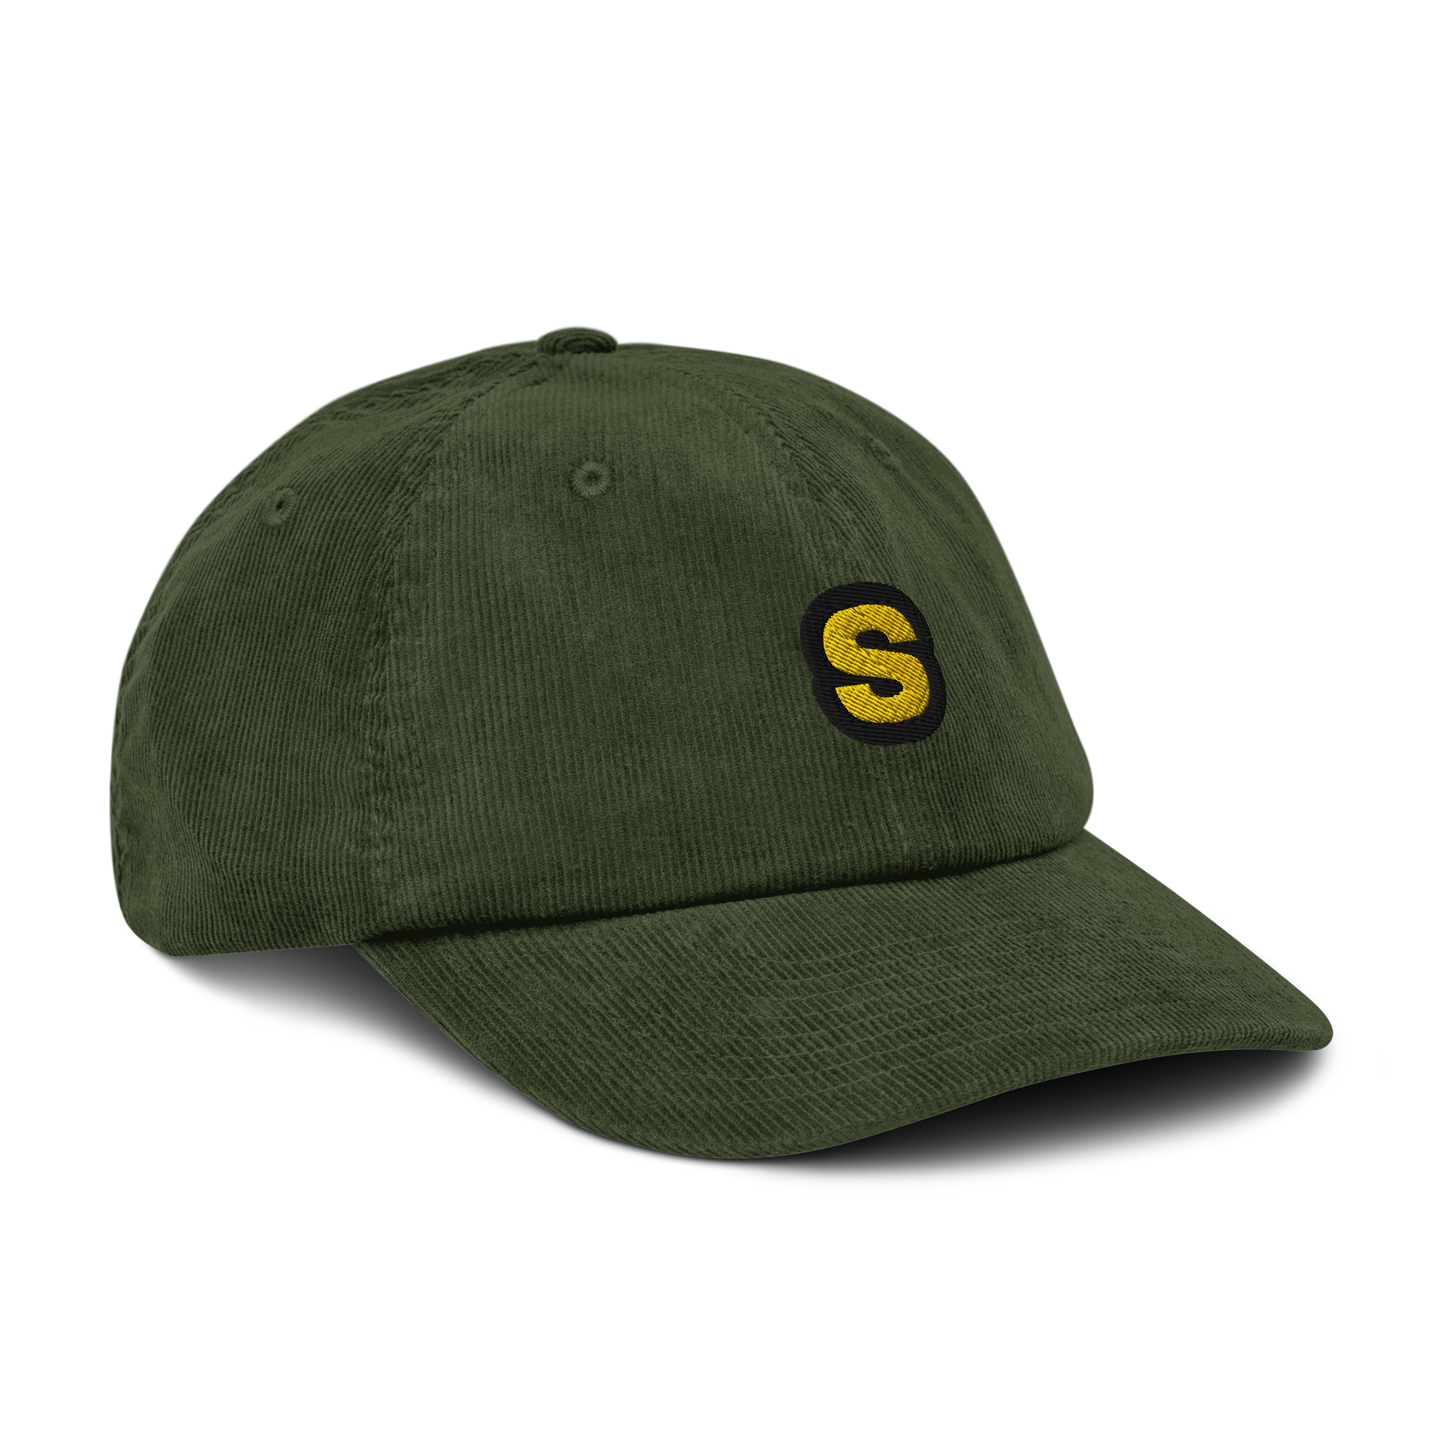 S - The letter collection - Corduroy hat